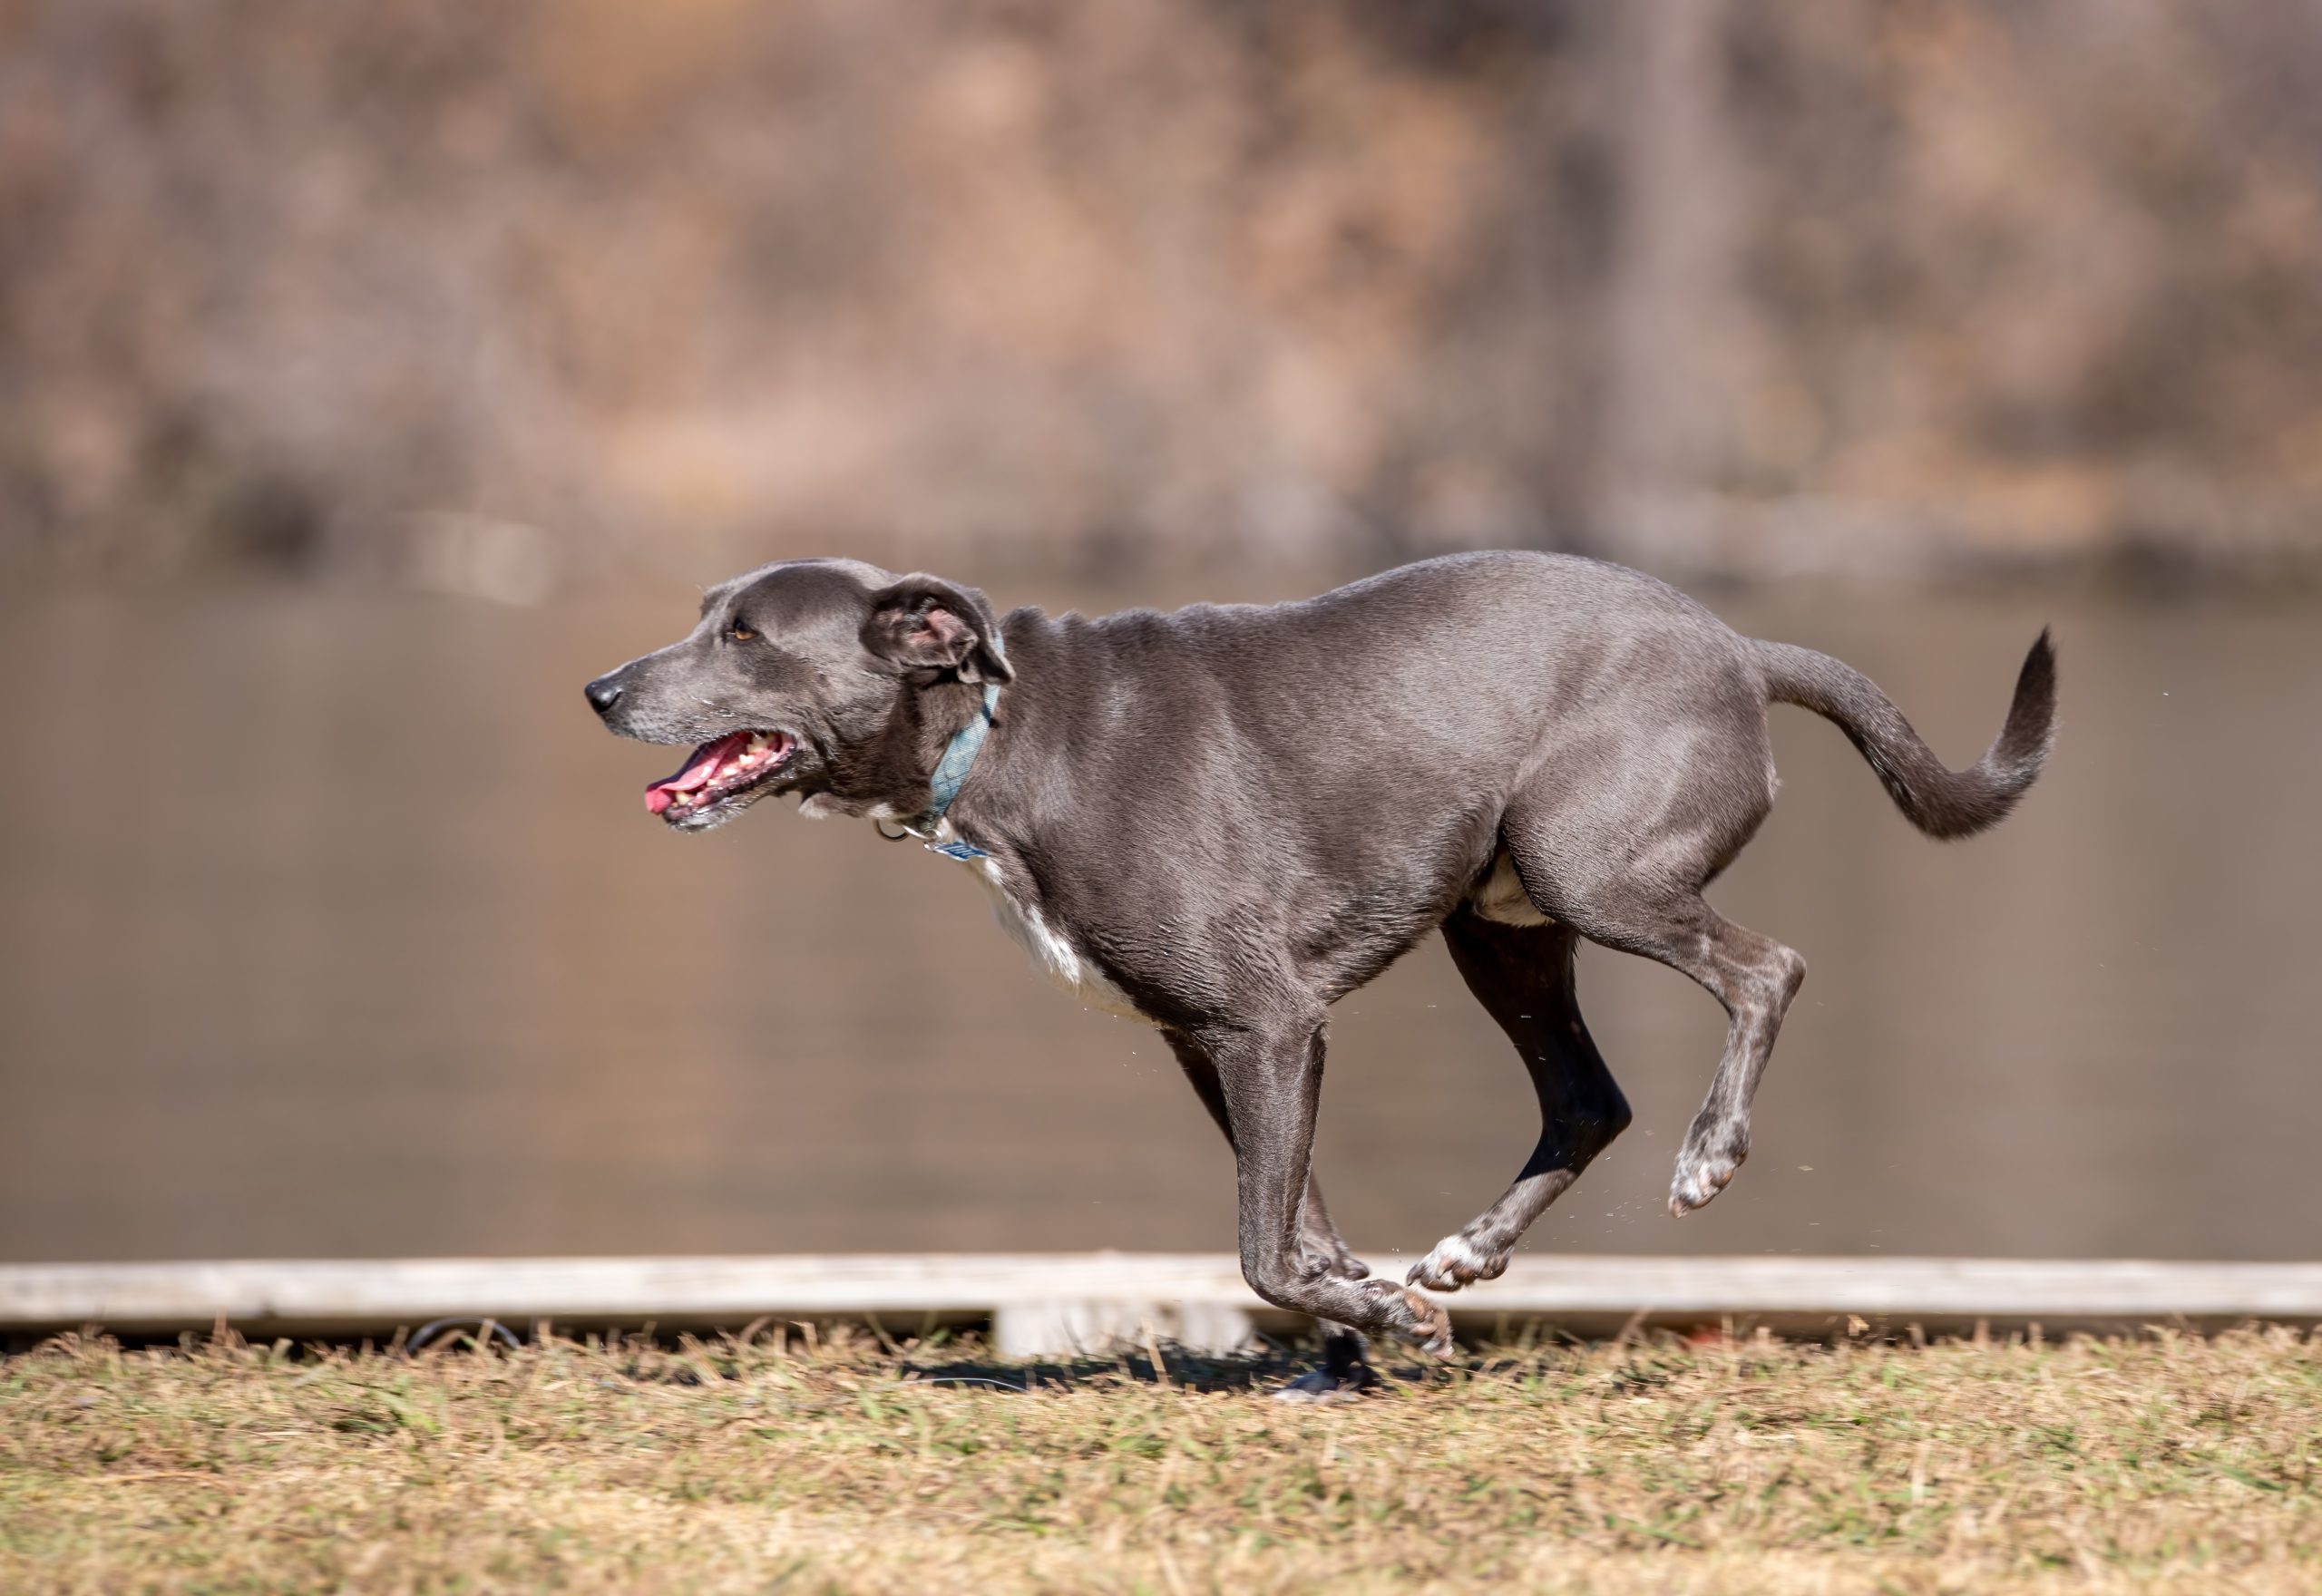 Keeping Senior Dogs Active: The Key Benefits and Exercise Guidelines